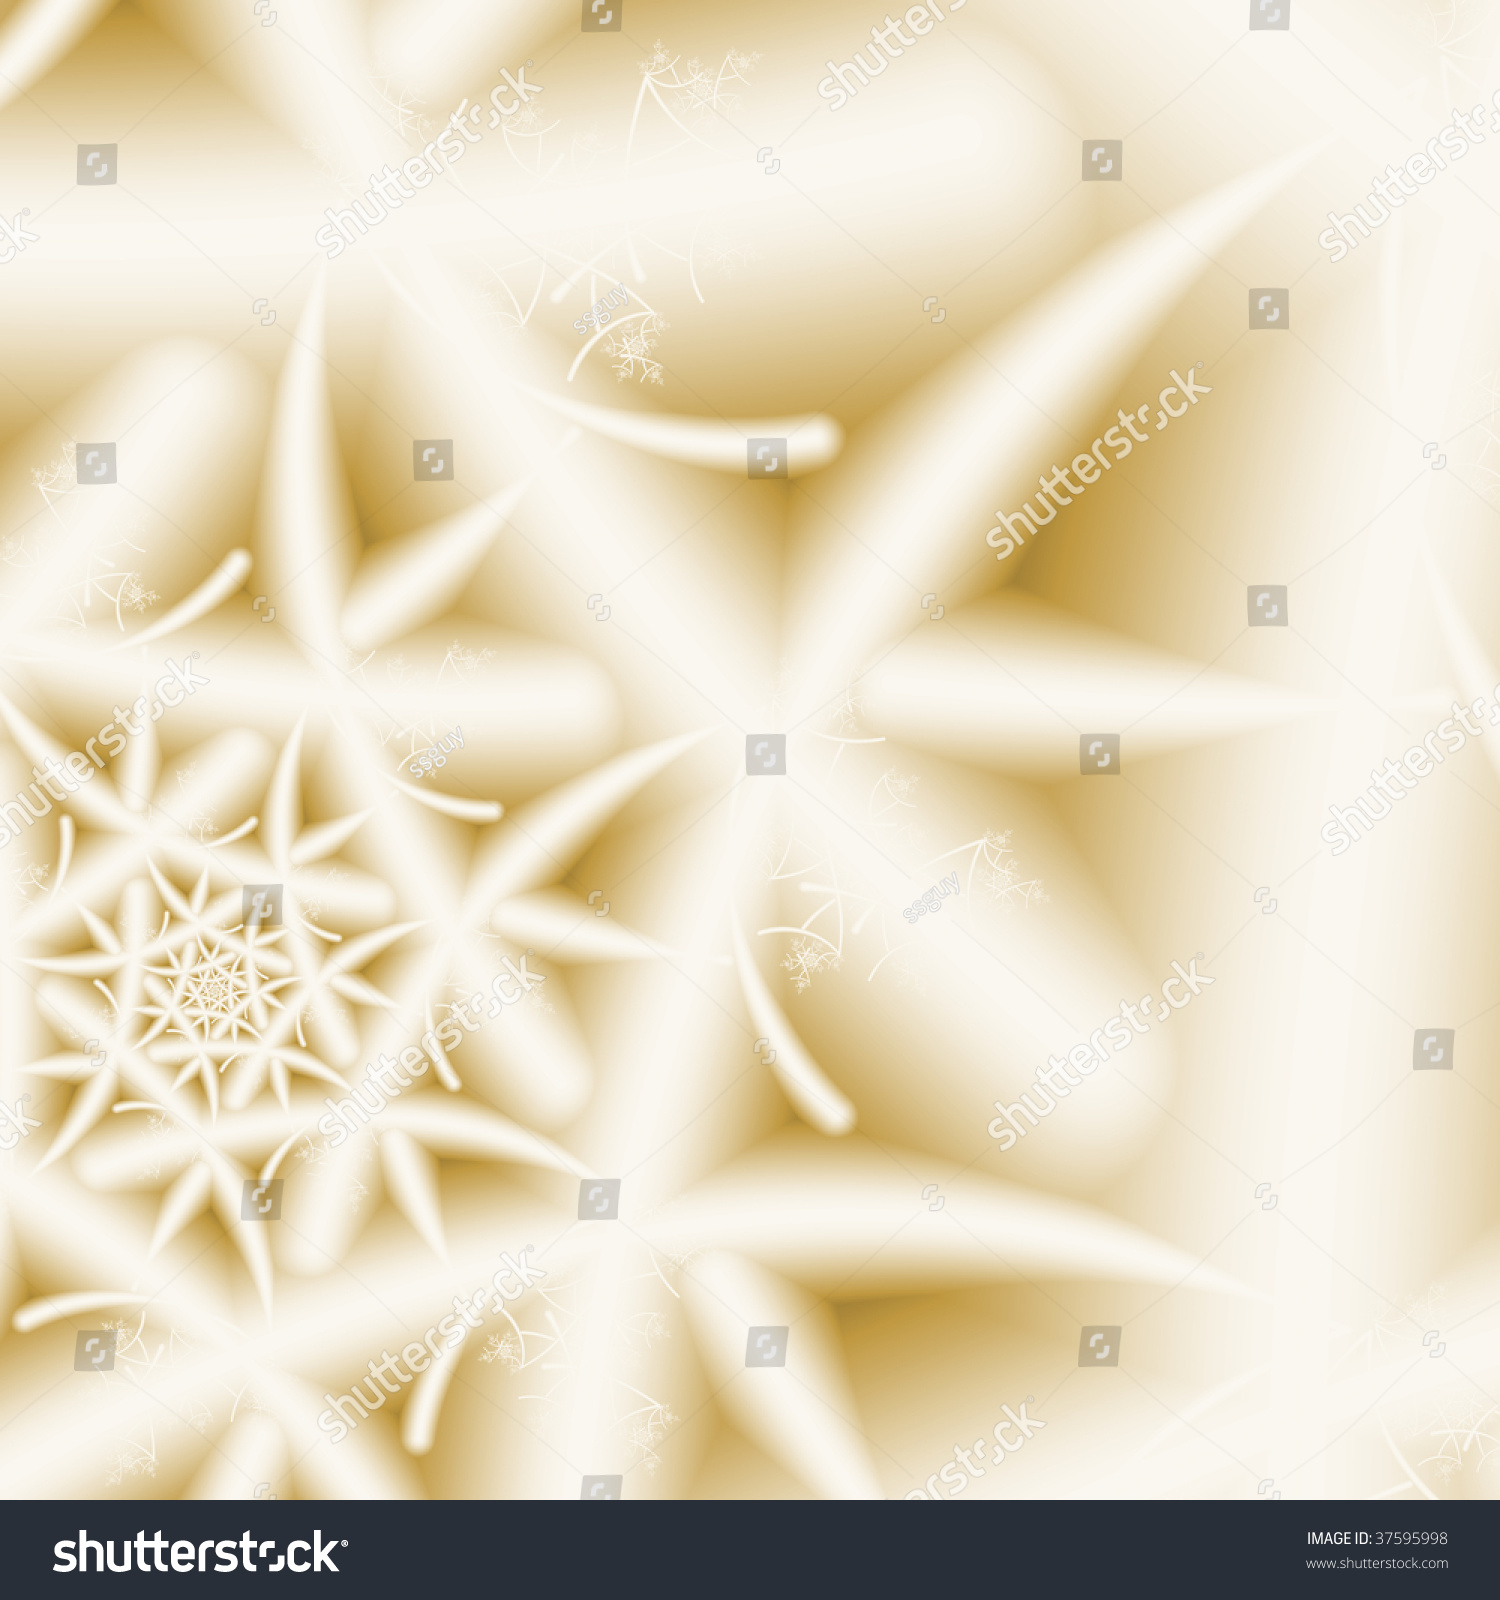 Edit Vectors Free Online - the abstract background | Shutterstock Editor